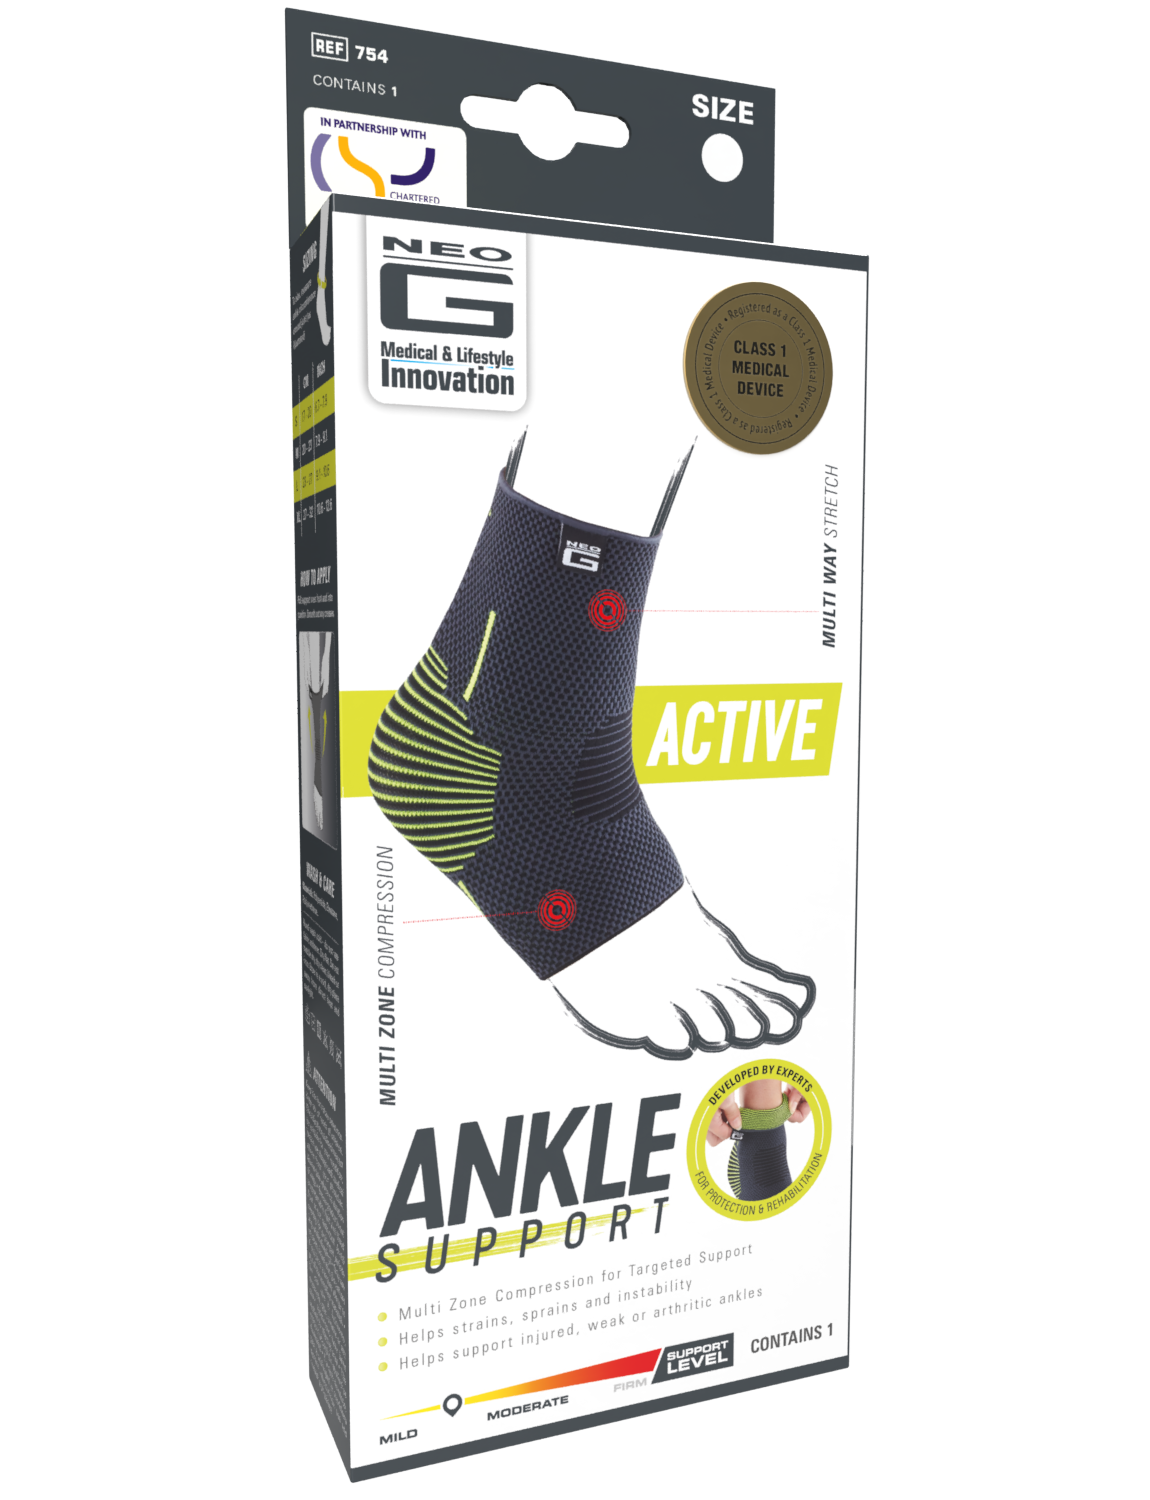 Packaging of Neo G USA Active Ankle Support with breathable fabric, featuring multi-zone compression and silicone cushioning for ankle stabilization. Marked as a class 1 medical device.